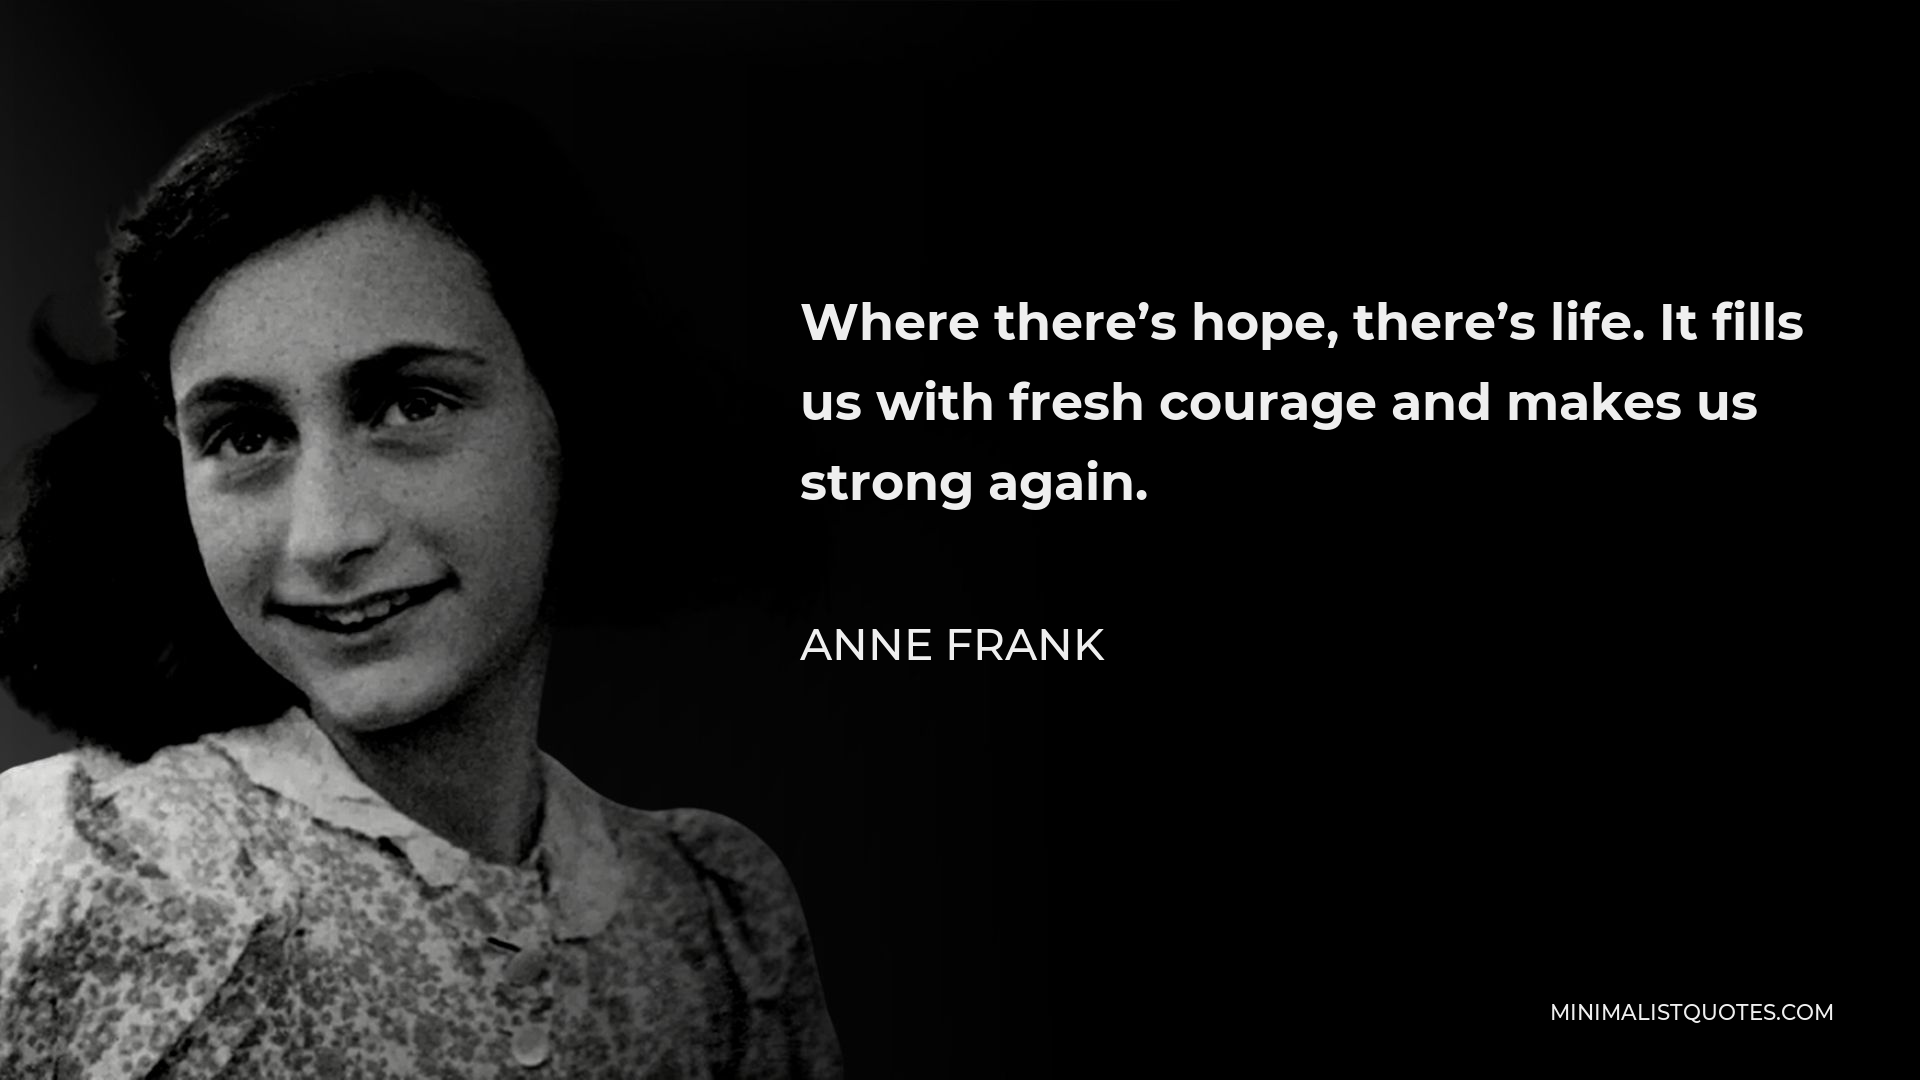 Anne Frank Quote: “Where there's hope, there's life. It fills us with fresh  courage and makes